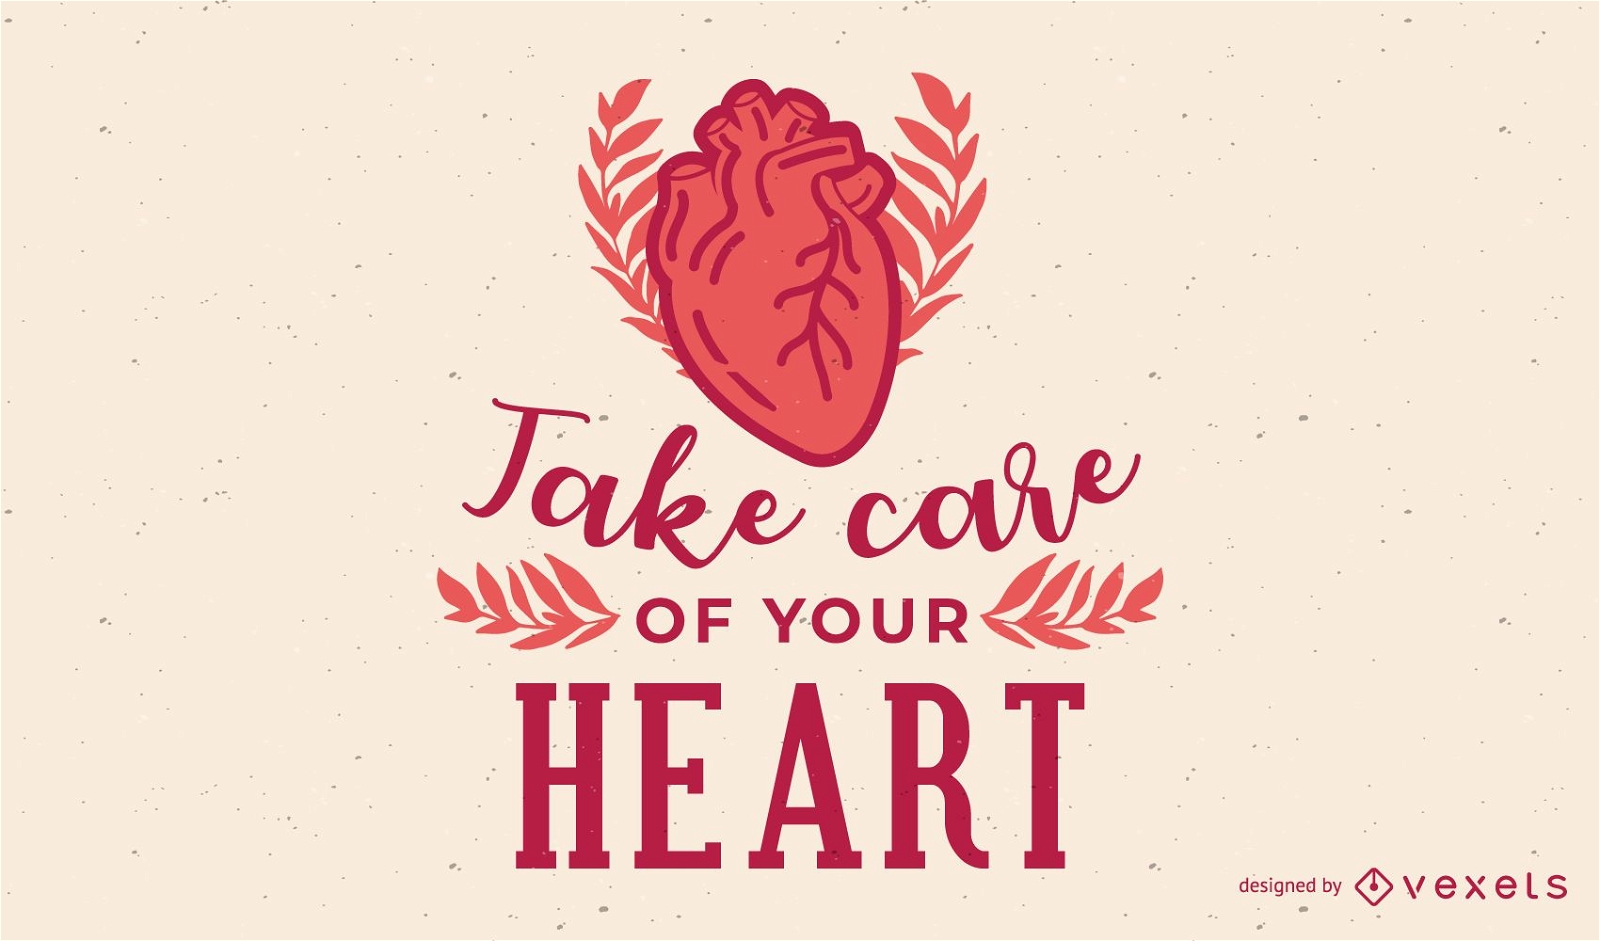 Take Care of your Heart Illustration